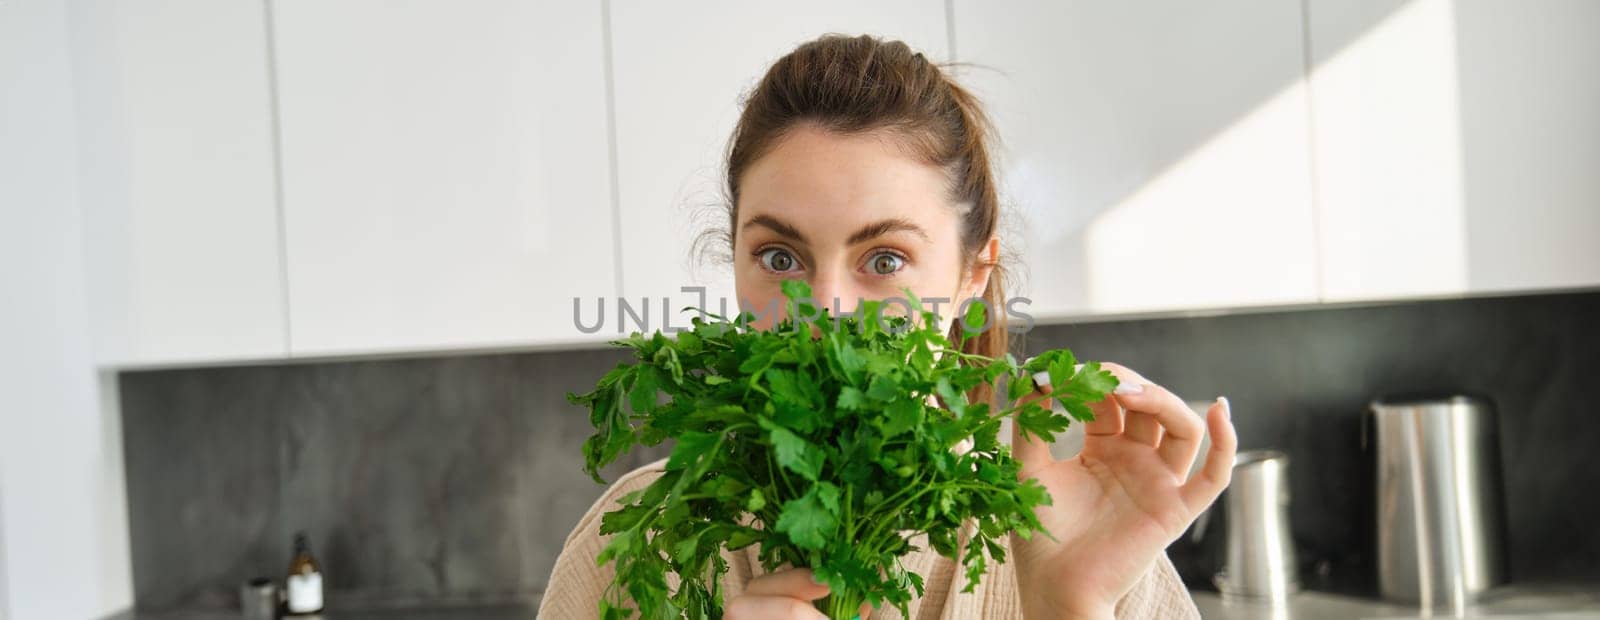 Portrait of beautiful woman cooking, holding fresh parsley, adding herbs while making salad, healthy meal in the kitchen.